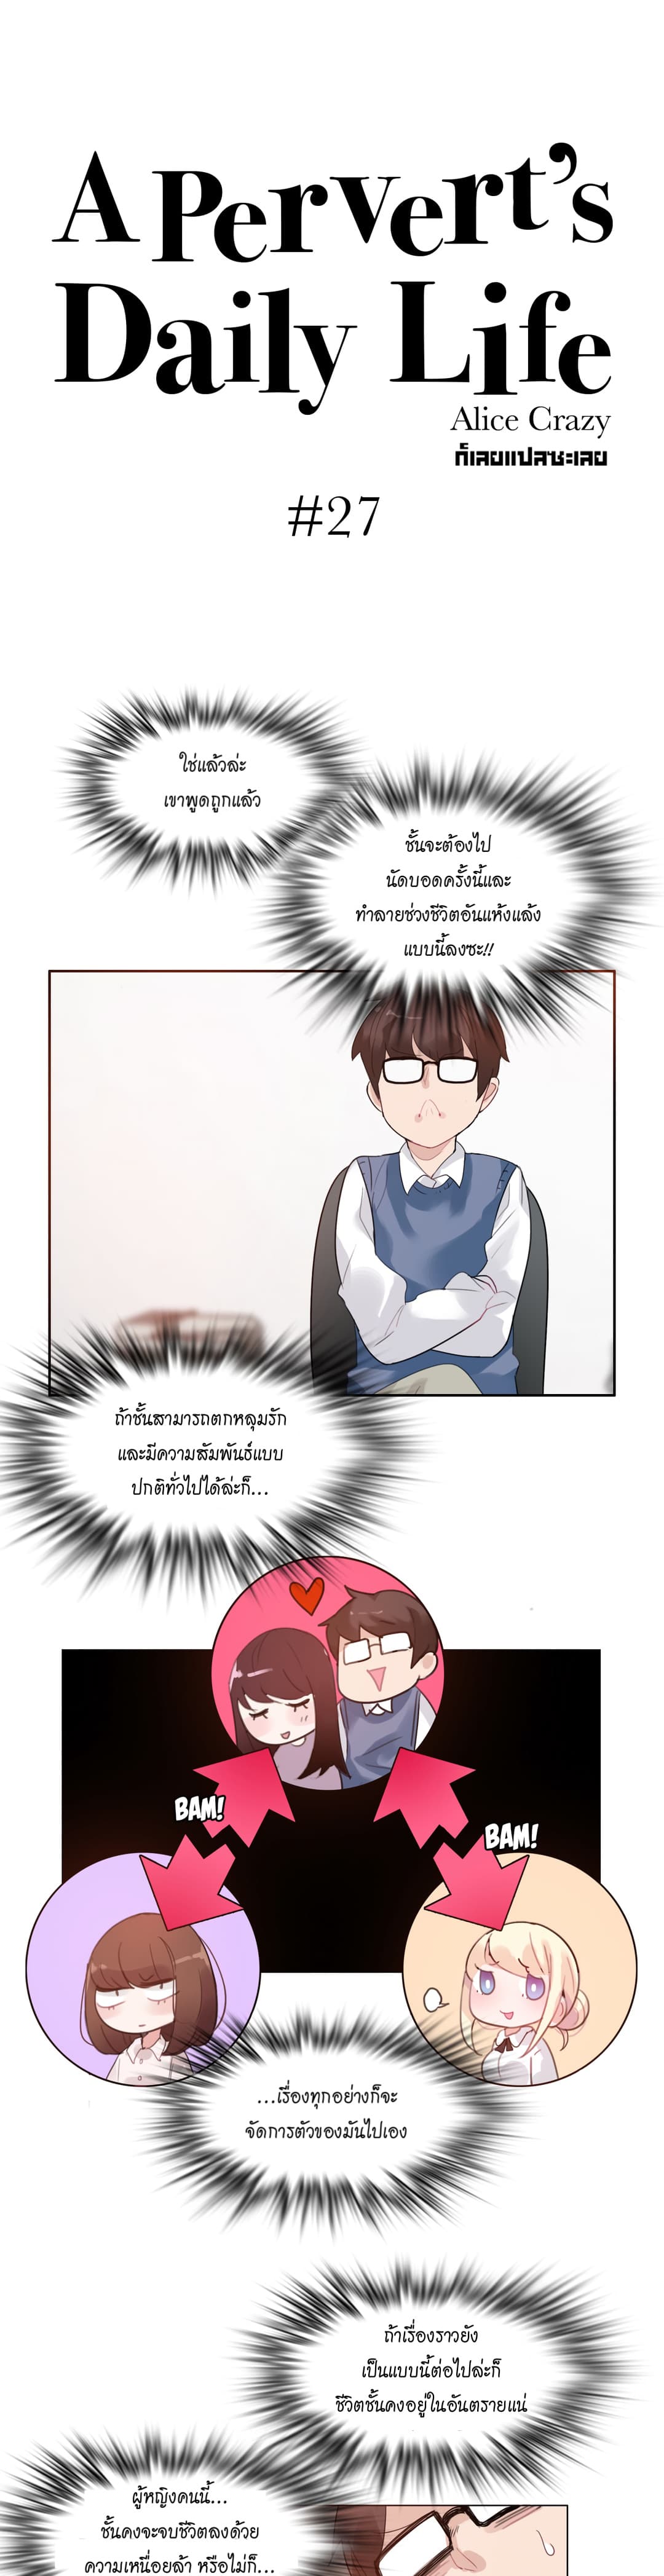 A Pervert’s Daily Life 27 (3)